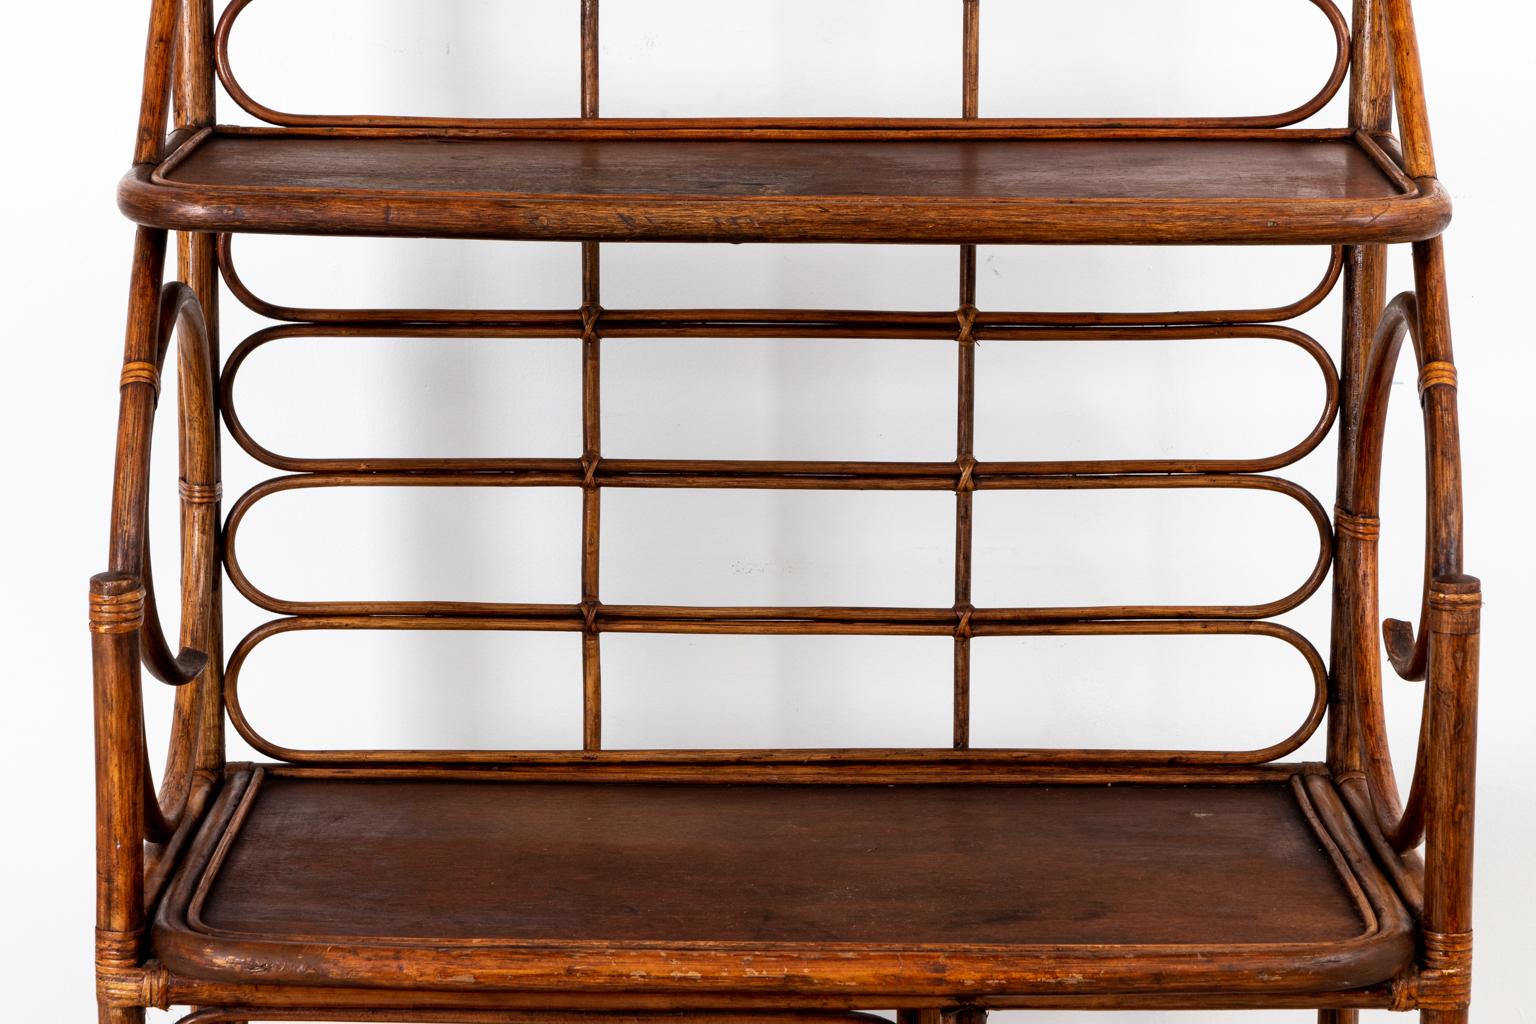 Vintage rattan étagère with deep shelves and scrolled rattan in the Hollywood Regency style, circa 1960s-1970s. The piece comes with large shelves and small bottom shelves. Please note of wear consistent with age as seen through minor finish loss on